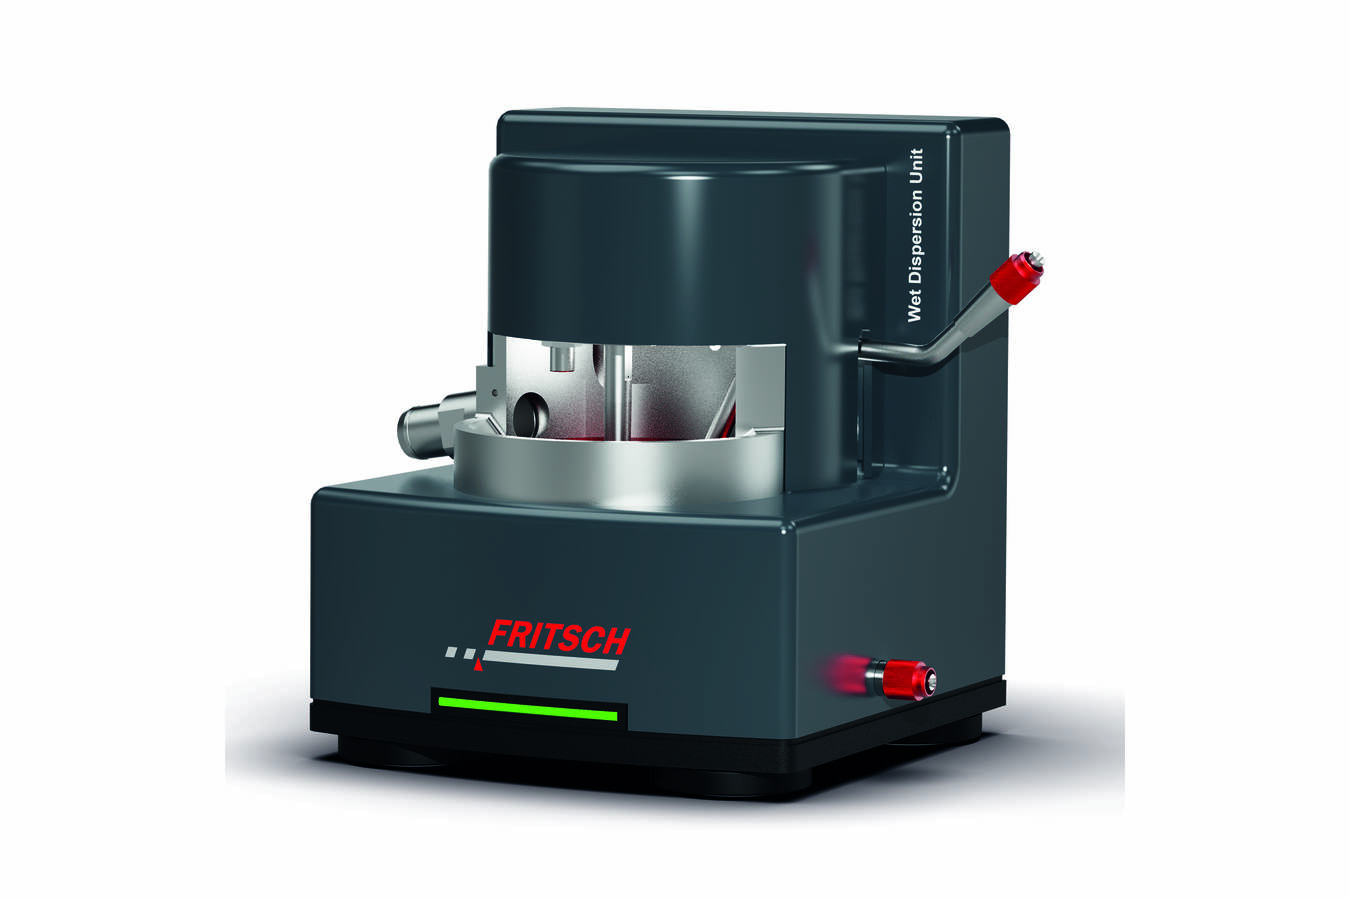 NEW modular wet dispersion system for optimal dispersion of the sample